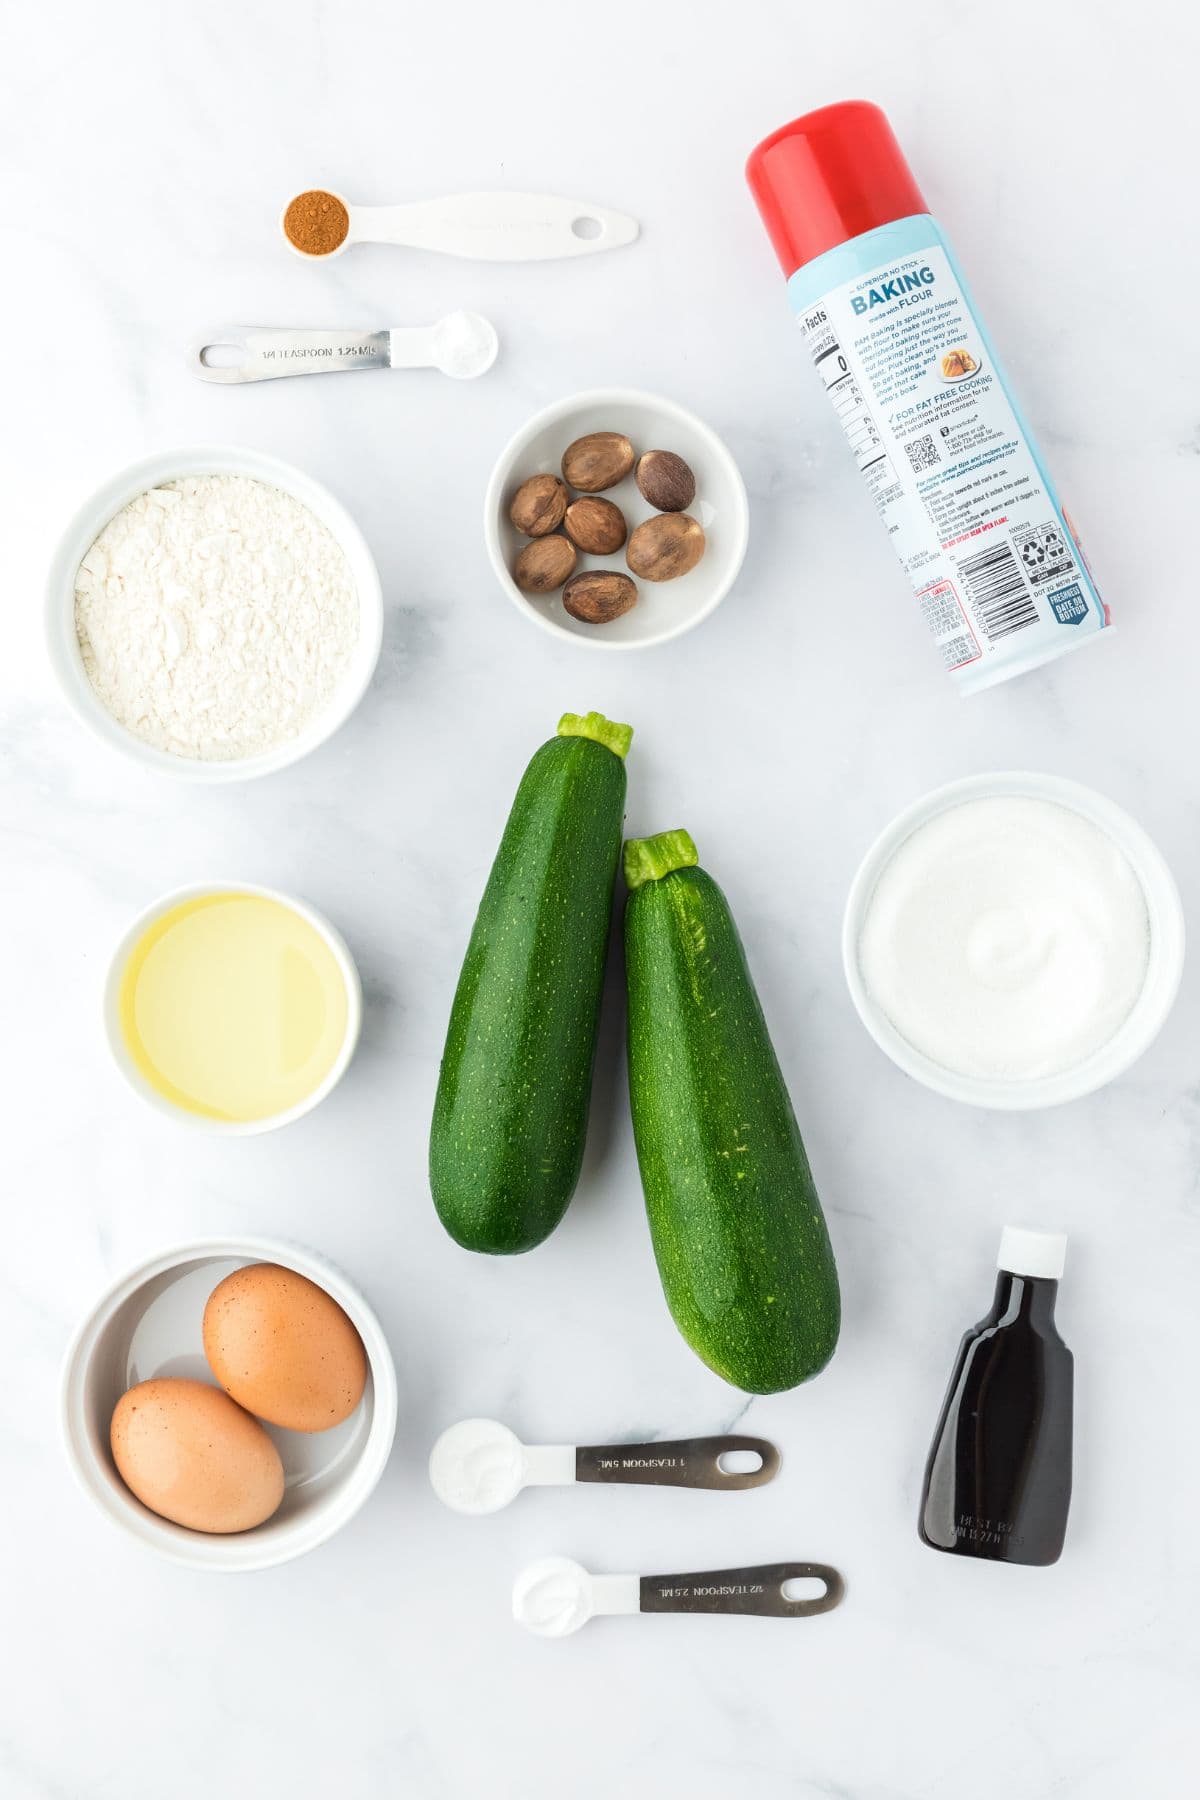 Ingredients to make zucchini bread on the table before mixing together.